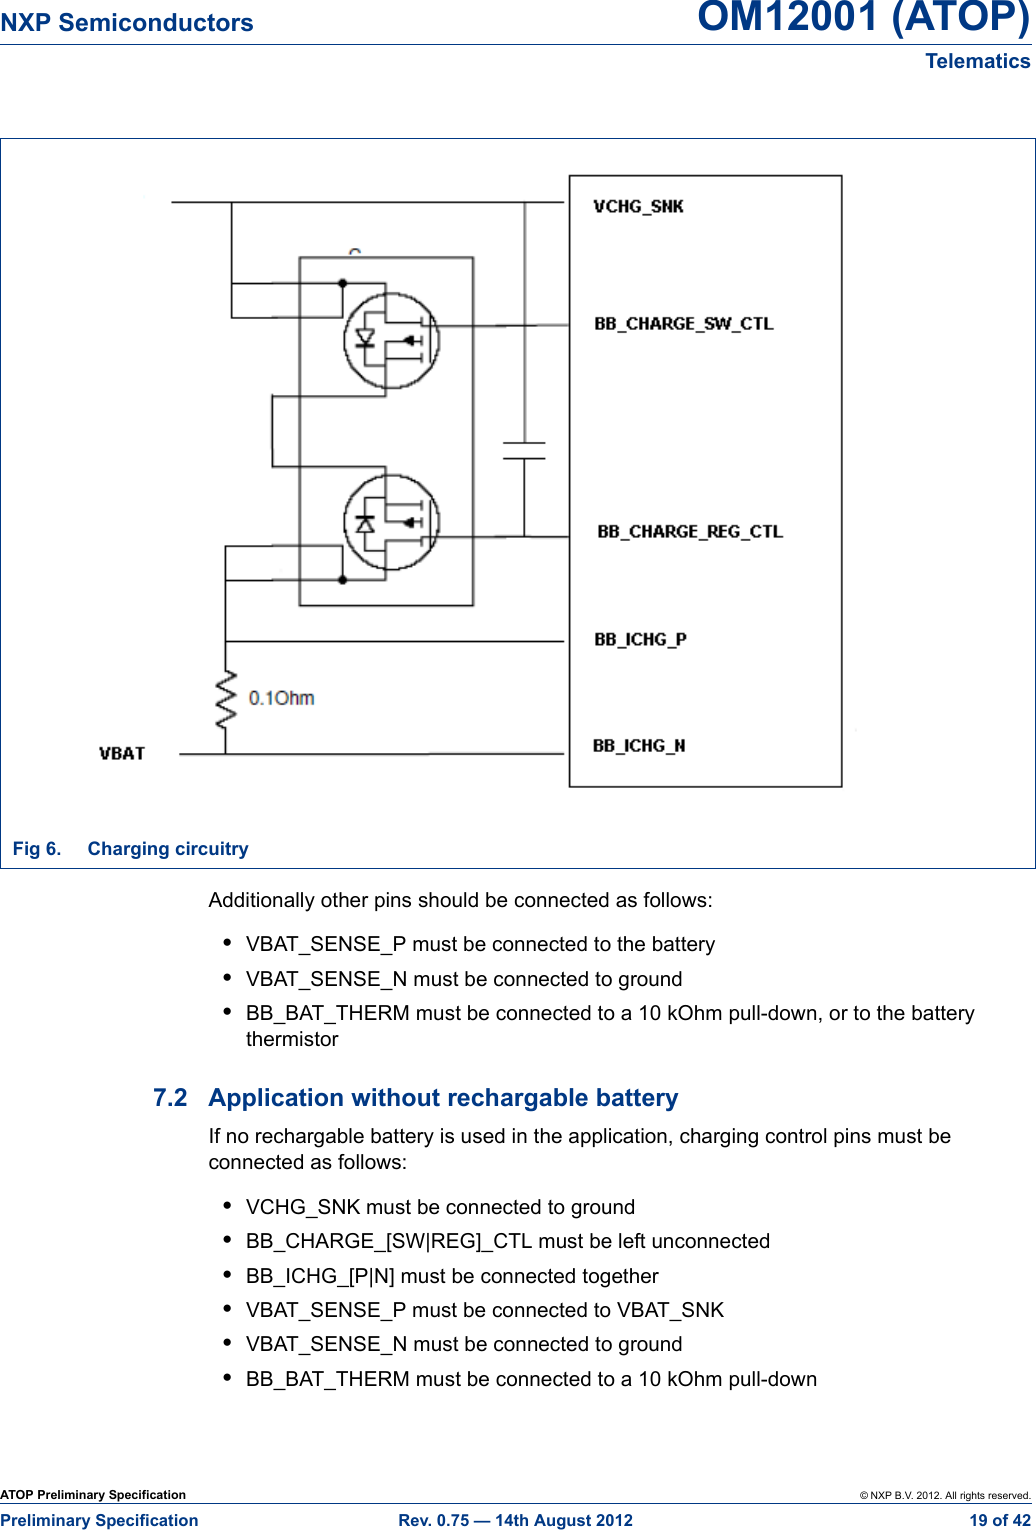 ATOP Preliminary Specification © NXP B.V. 2012. All rights reserved.Preliminary Specification Rev. 0.75 — 14th August 2012  19 of 42NXP Semiconductors OM12001 (ATOP)Telematics Additionally other pins should be connected as follows:•VBAT_SENSE_P must be connected to the battery•VBAT_SENSE_N must be connected to ground•BB_BAT_THERM must be connected to a 10 kOhm pull-down, or to the battery thermistor7.2 Application without rechargable batteryIf no rechargable battery is used in the application, charging control pins must be connected as follows:•VCHG_SNK must be connected to ground•BB_CHARGE_[SW|REG]_CTL must be left unconnected•BB_ICHG_[P|N] must be connected together•VBAT_SENSE_P must be connected to VBAT_SNK•VBAT_SENSE_N must be connected to ground•BB_BAT_THERM must be connected to a 10 kOhm pull-downFig 6. Charging circuitry